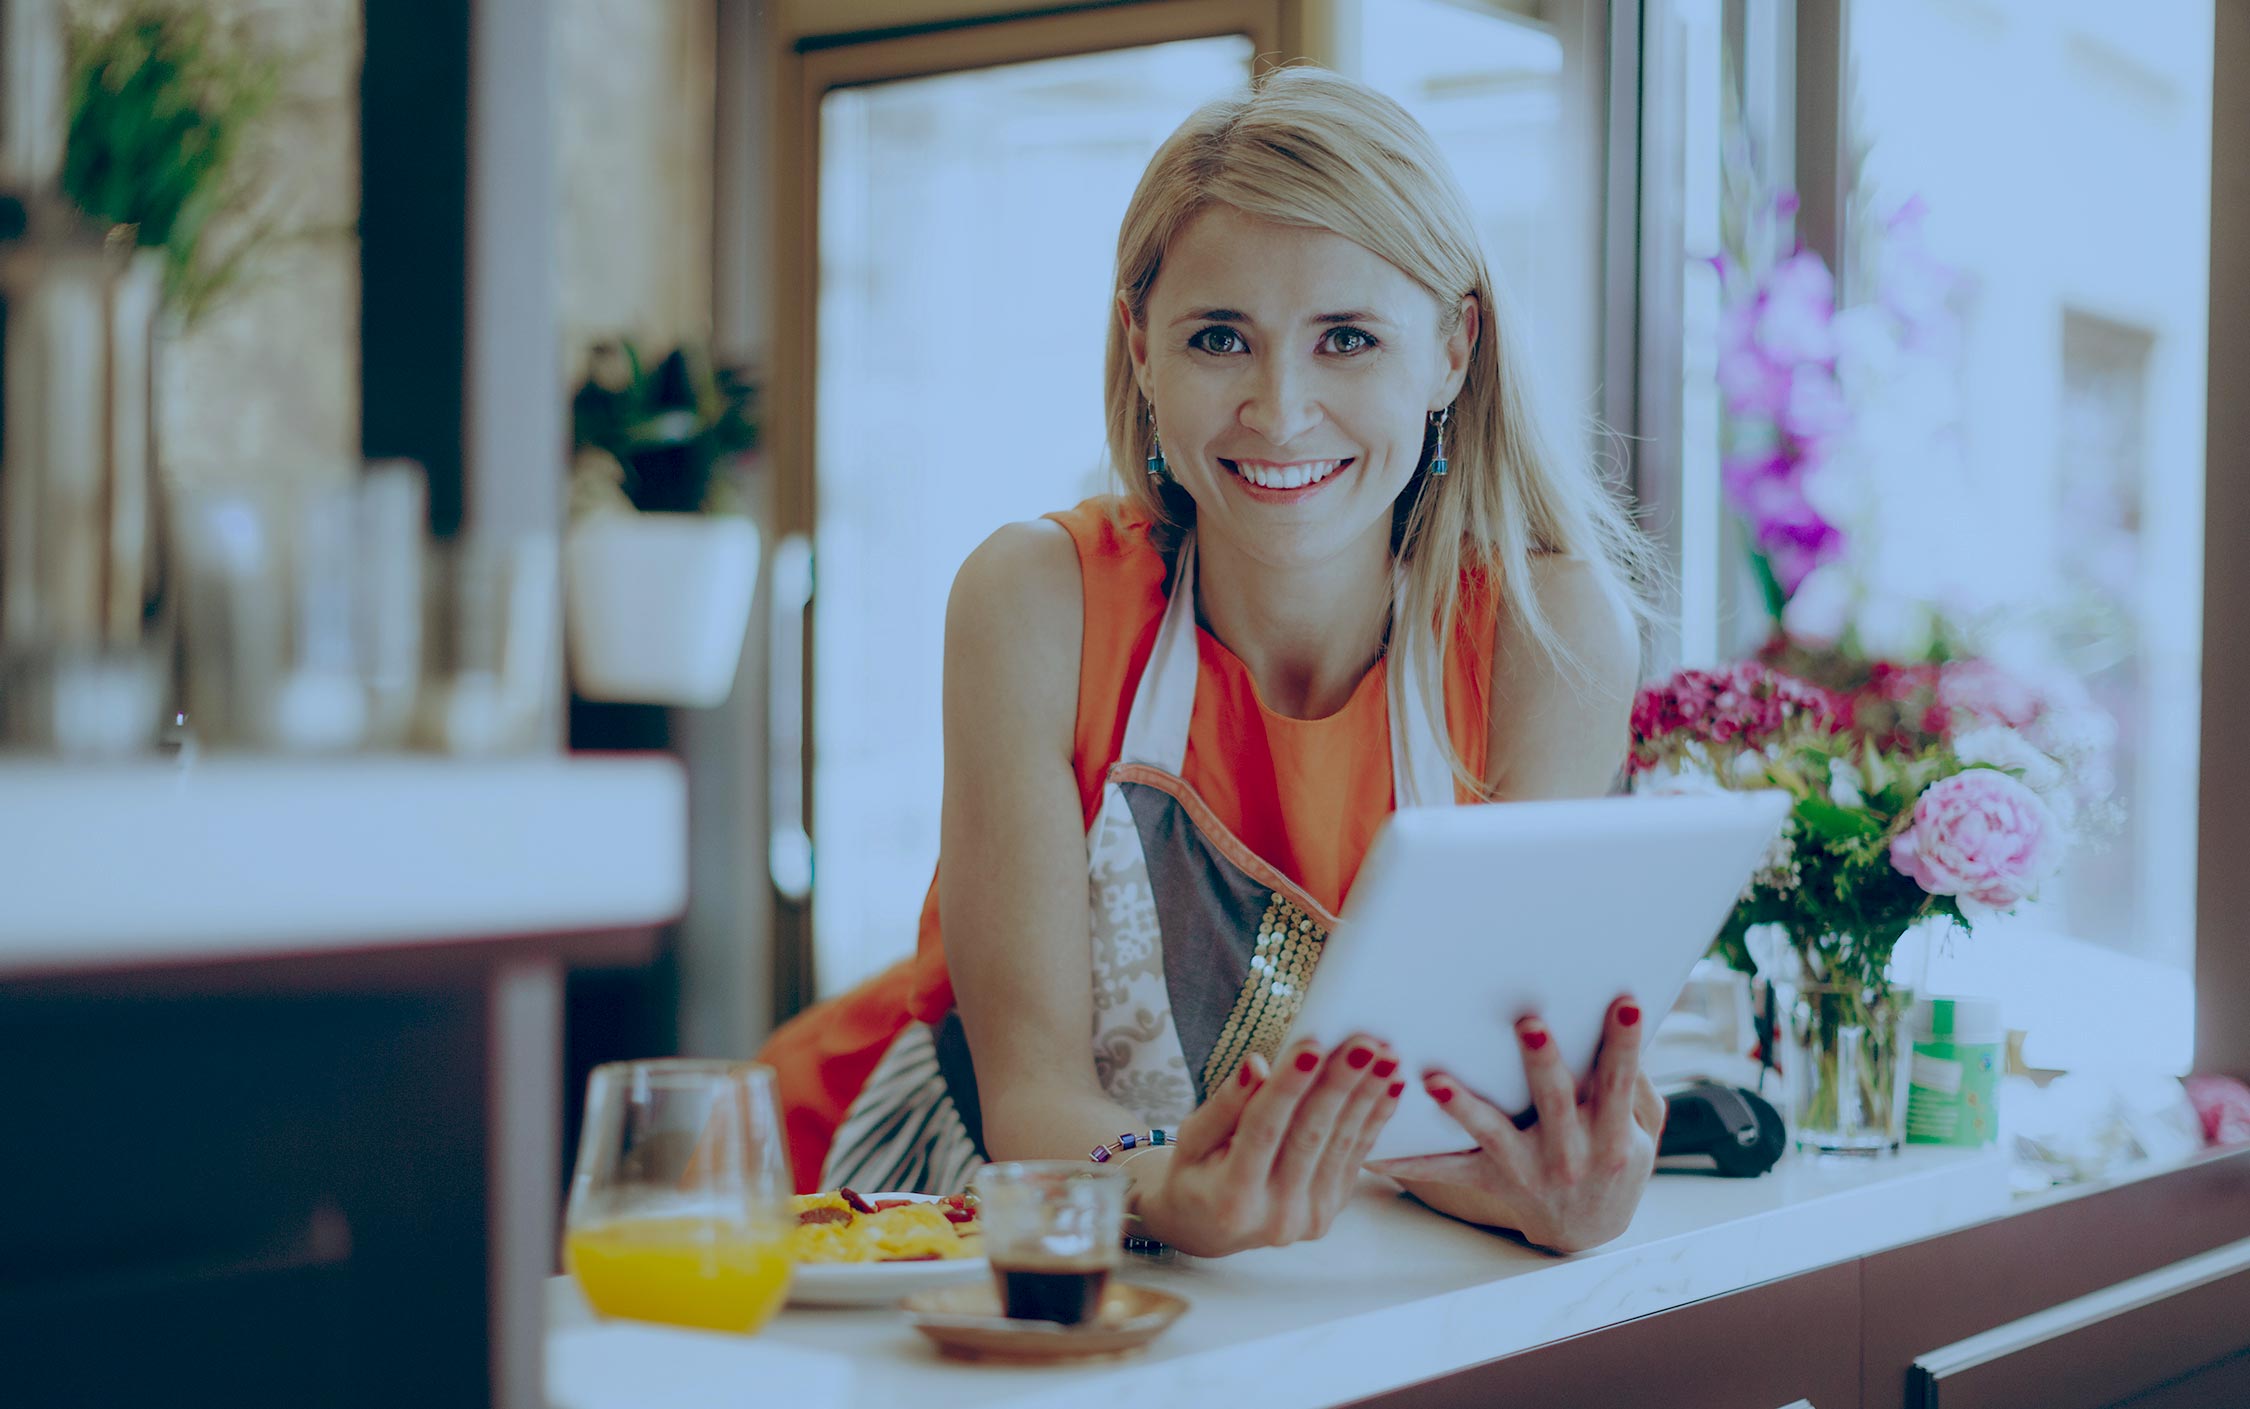 Woman leaning on counter with ipad in hand